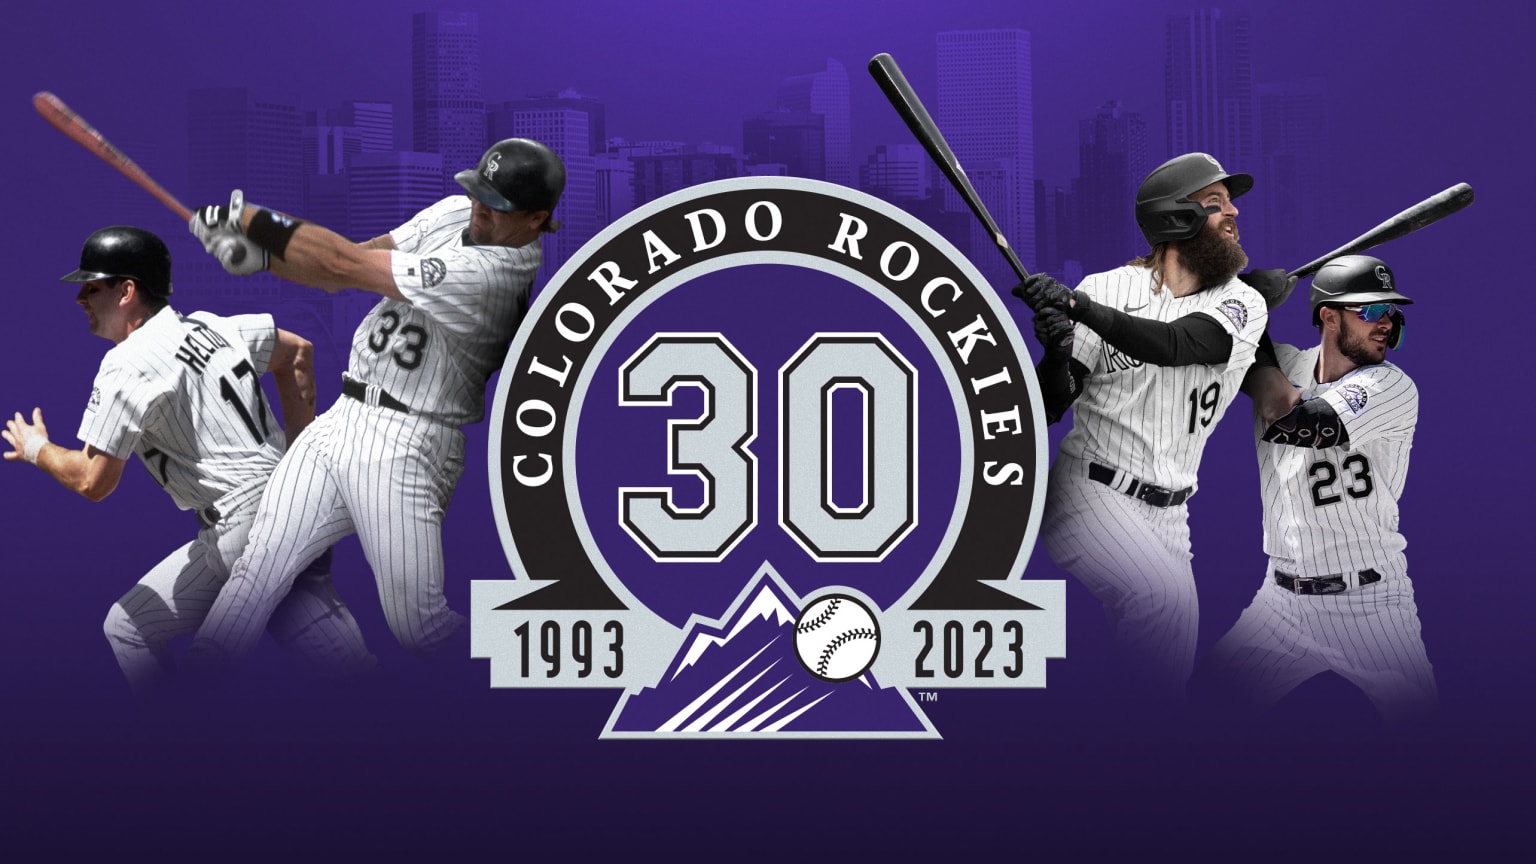 Colorado Rockies Youth Camps at Coors Field